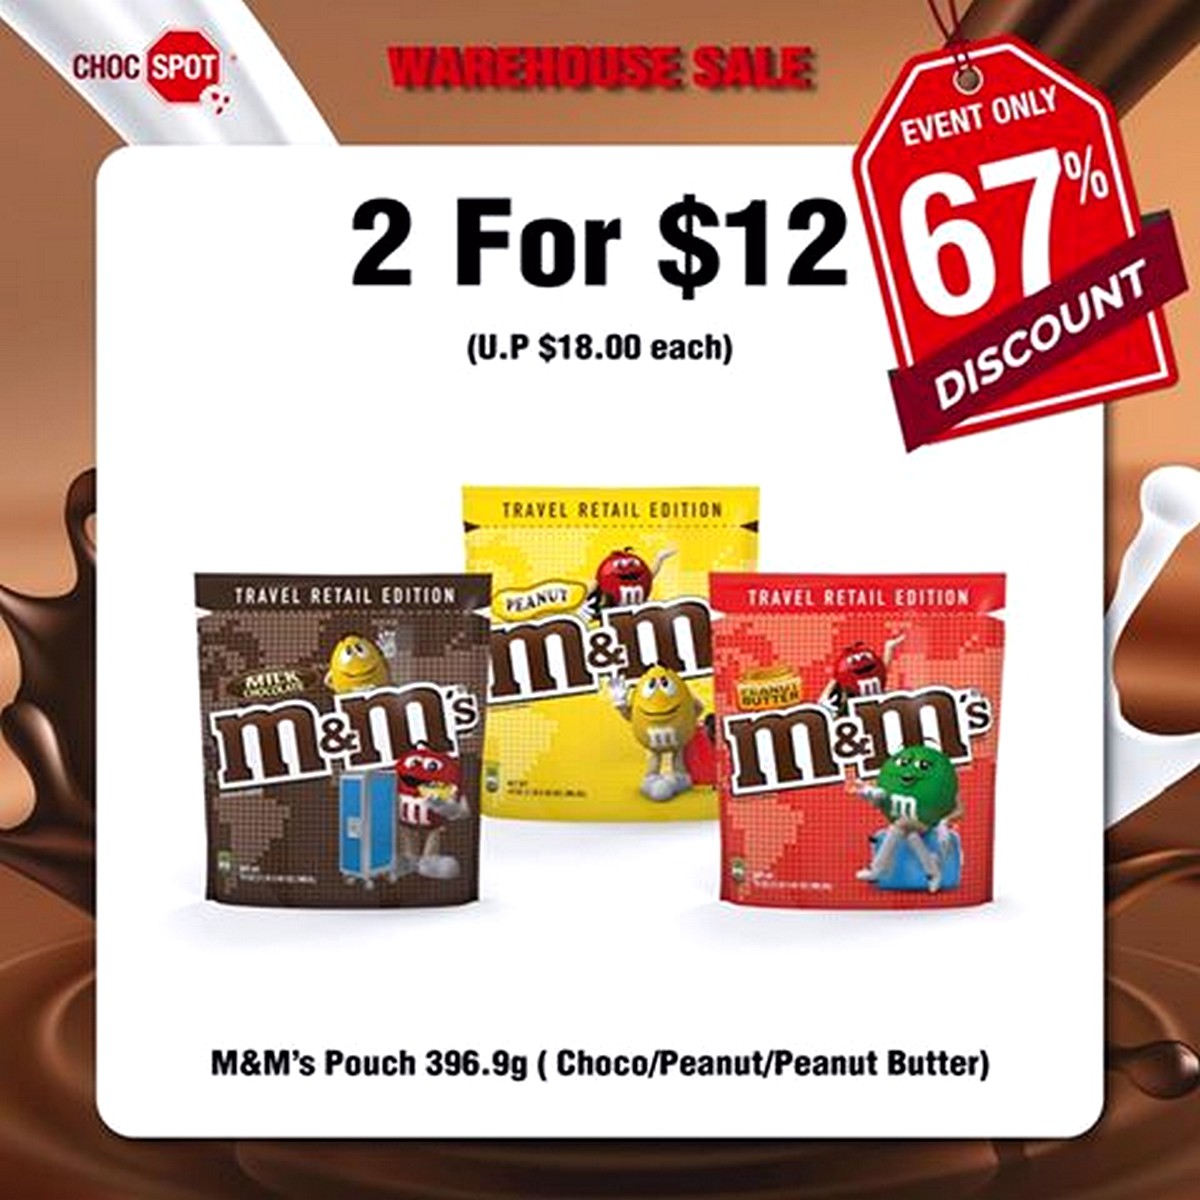 Choc-Spot-Warehouse-Sale-Highlights-009 24 Jul-2 Aug 2020: Choc Spot Warehouse Sale! Up to 80% off Chocolates, Sweets, Chips, Biscuits!